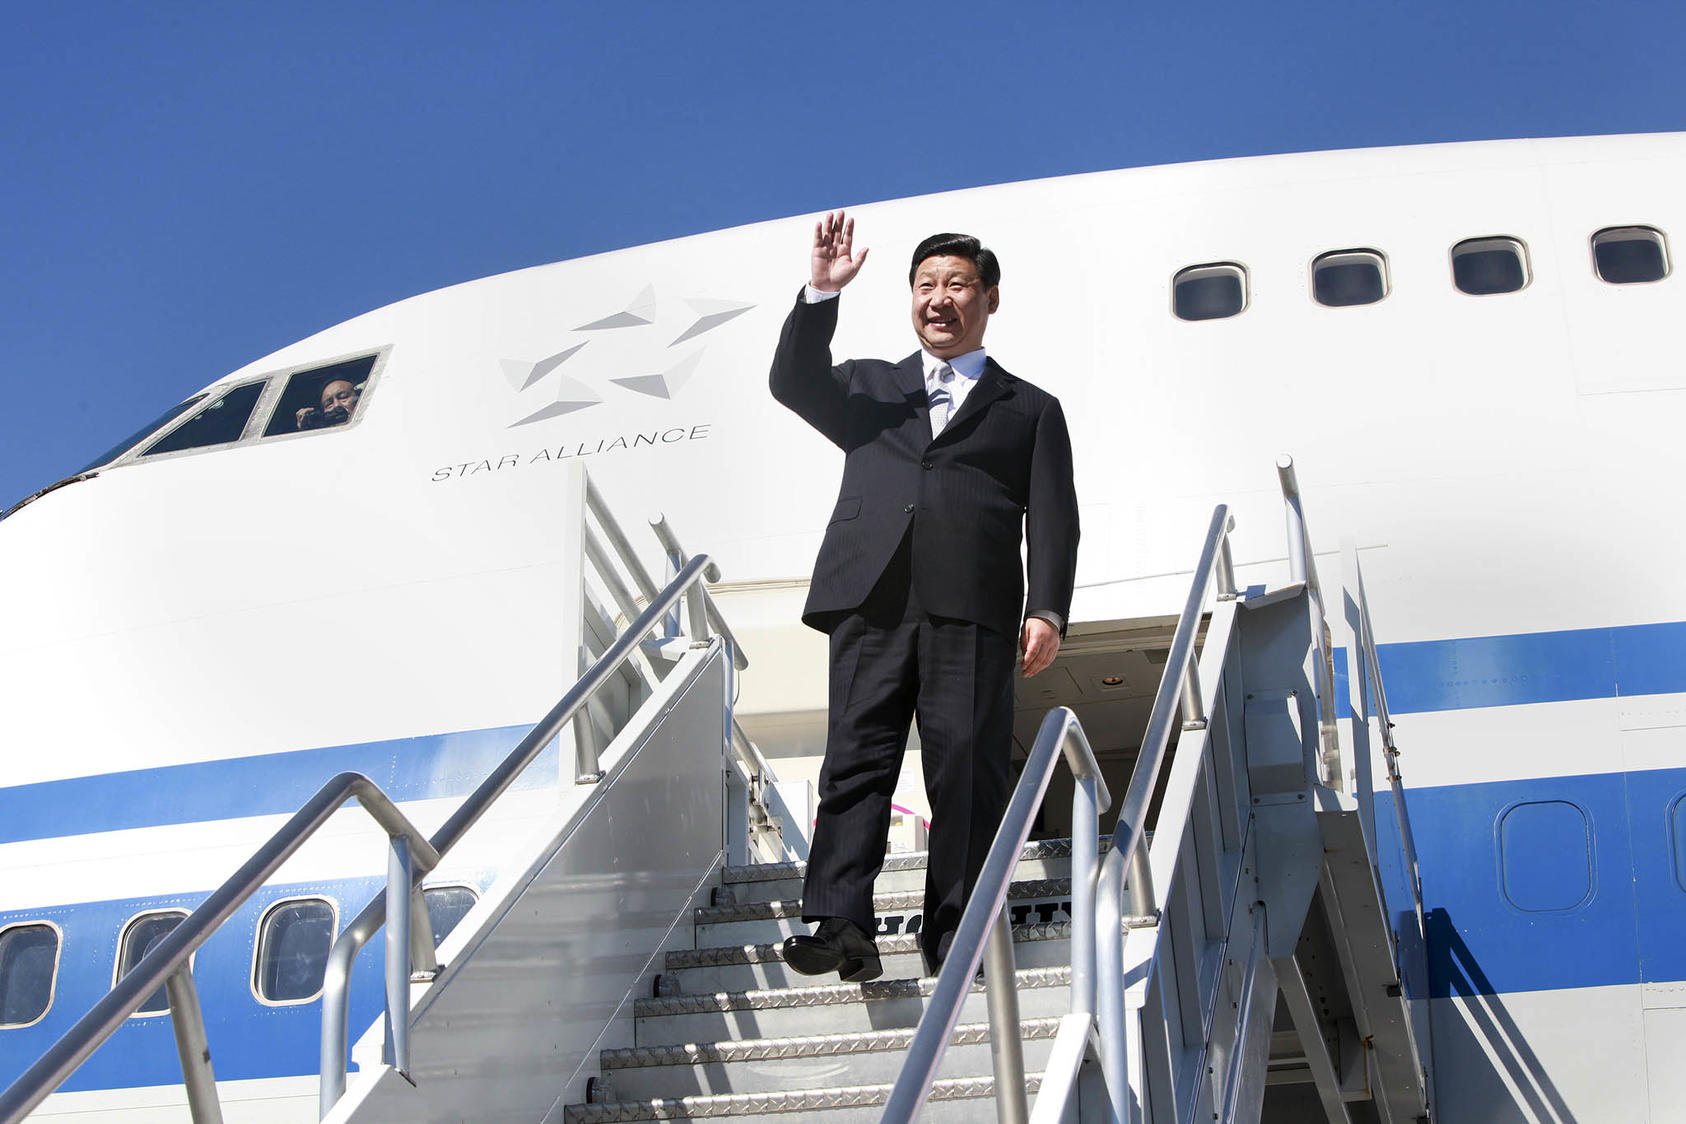 Xi Jinping arrives at the Los Angeles International Airport in Los Angeles, Feb. 16, 2012. Xi has not made a foreign trip since the onset of the COVID-19 pandemic. (Monica Almeida/The New York Times)